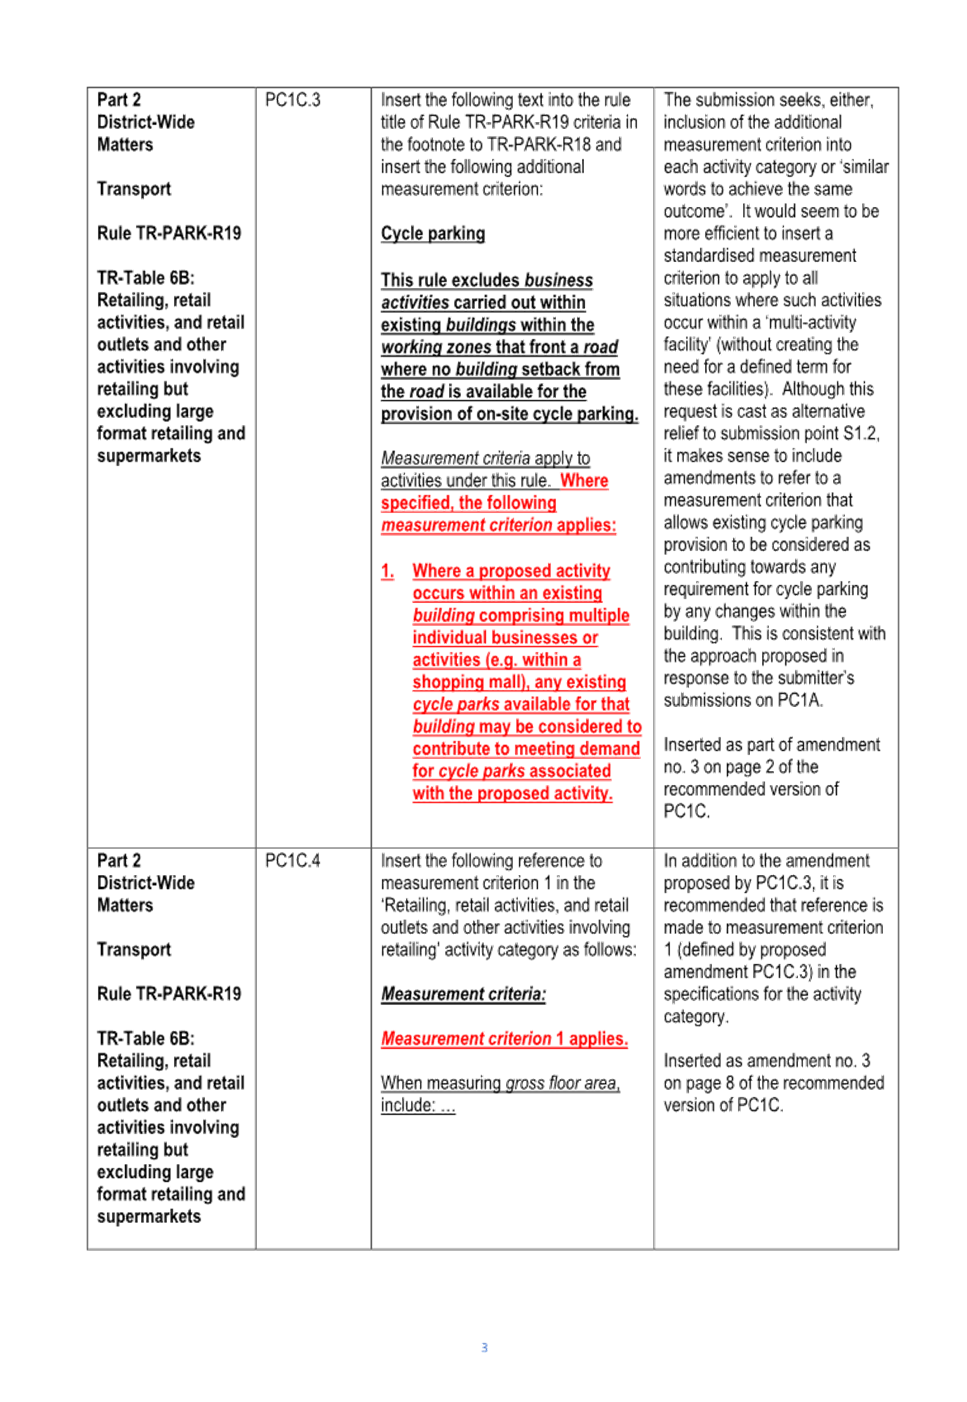 A white sheet with black text and red text

Description automatically generated